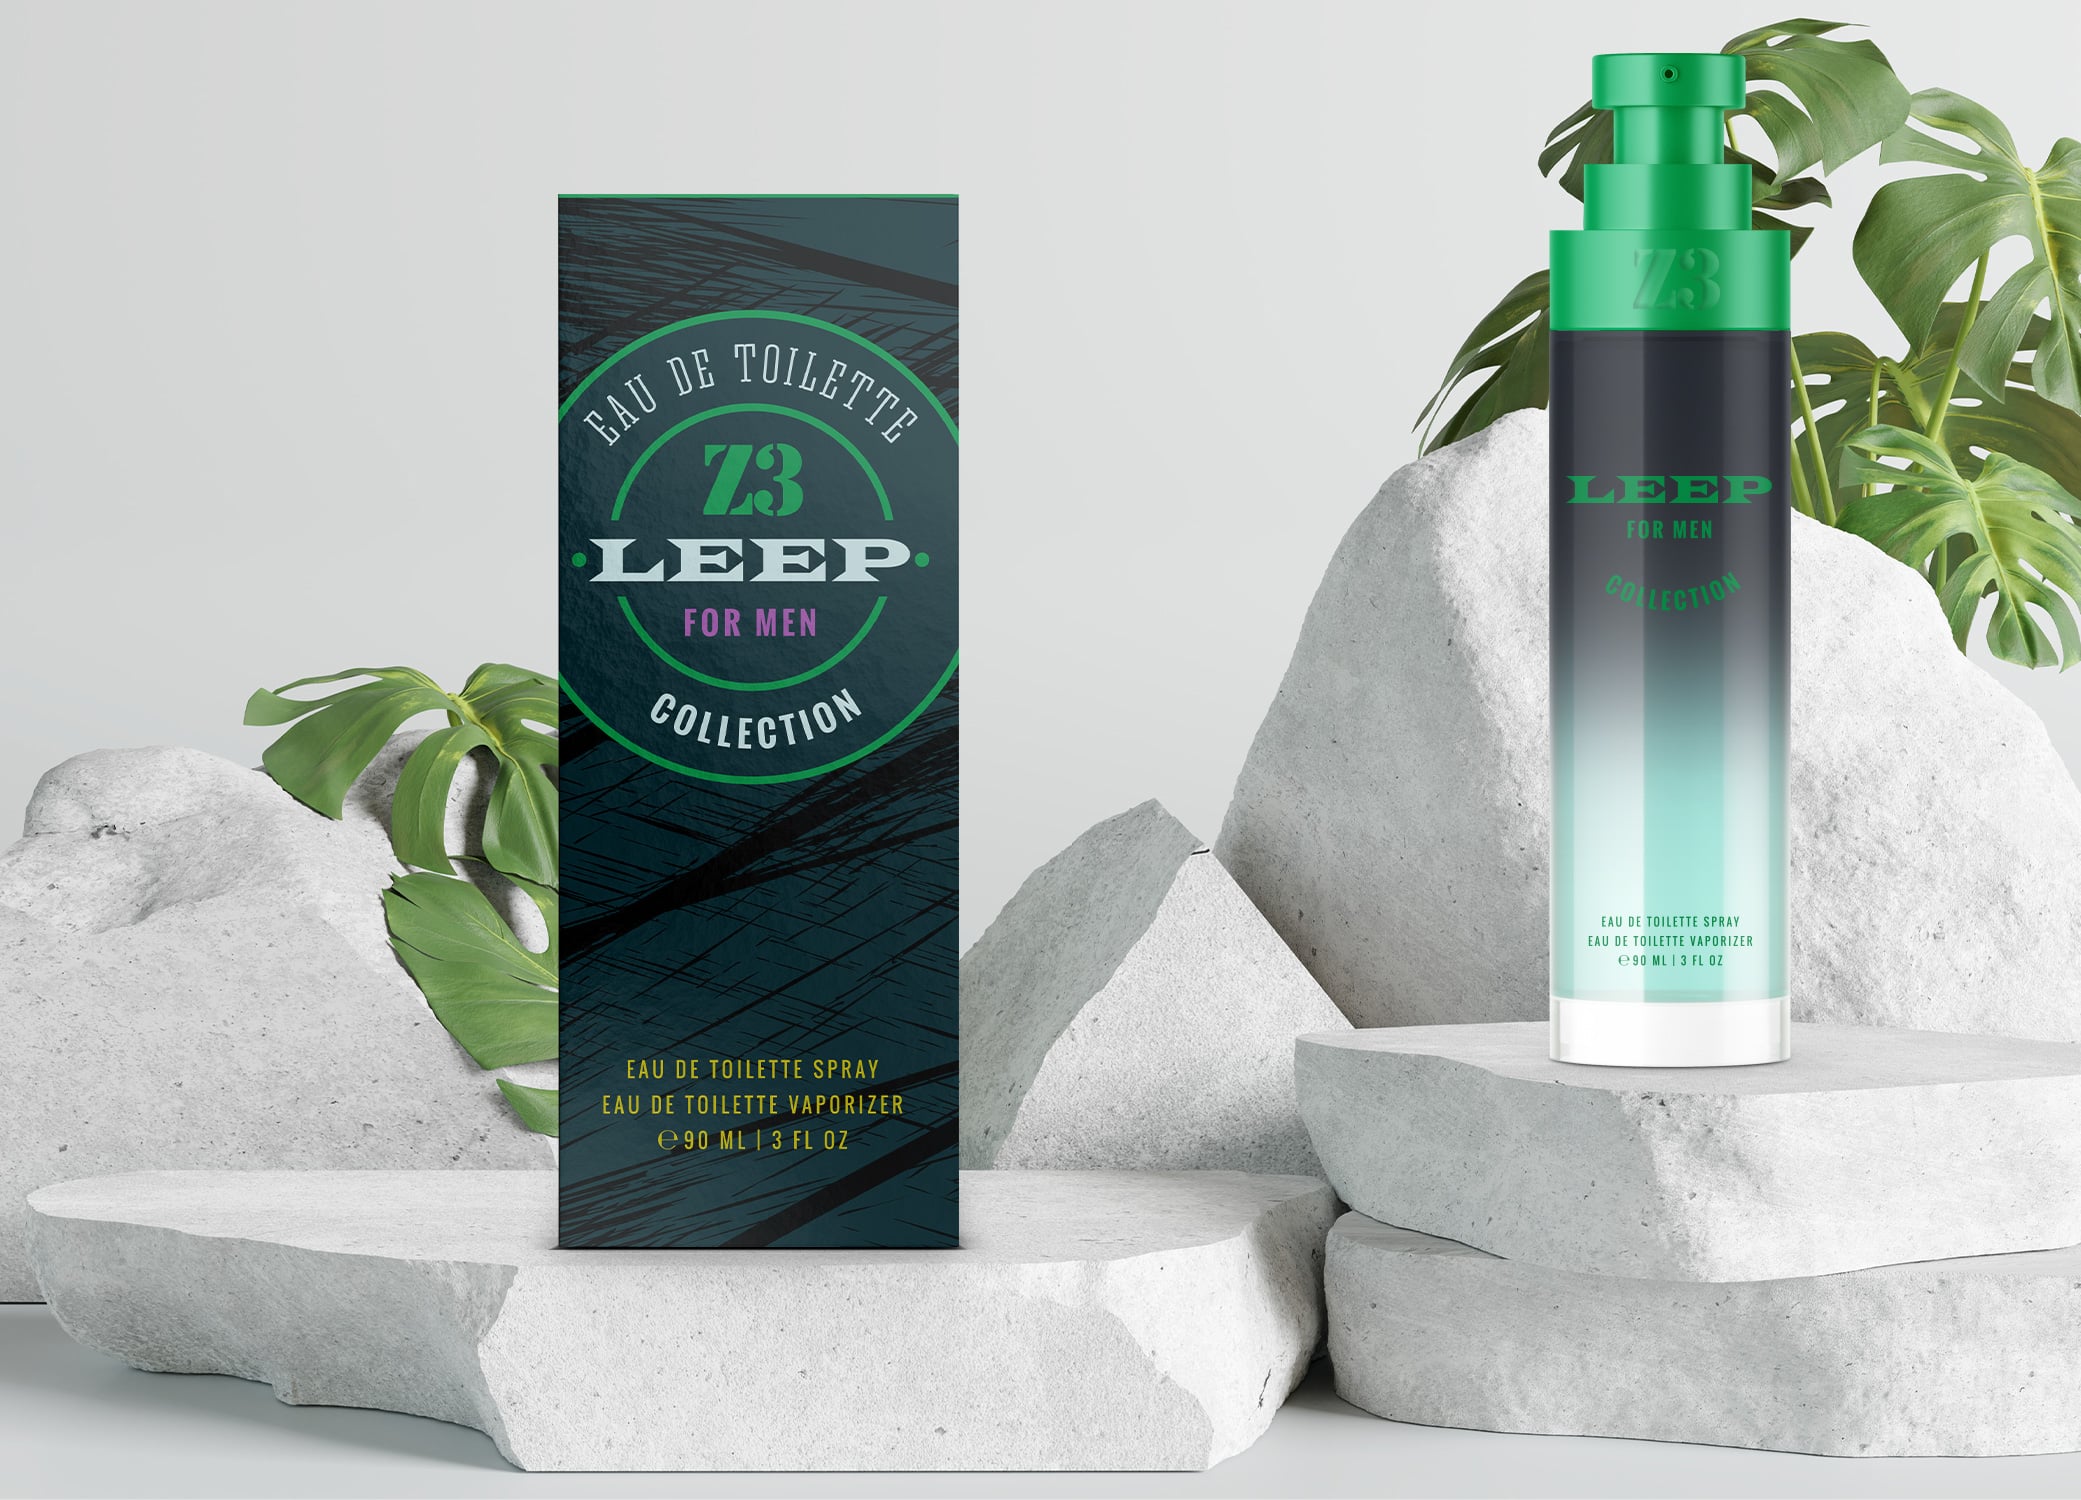 YZY Perfume men's fragrance bottle and package design in jungle green with tiger scratch pattern for Z3 Leep product.